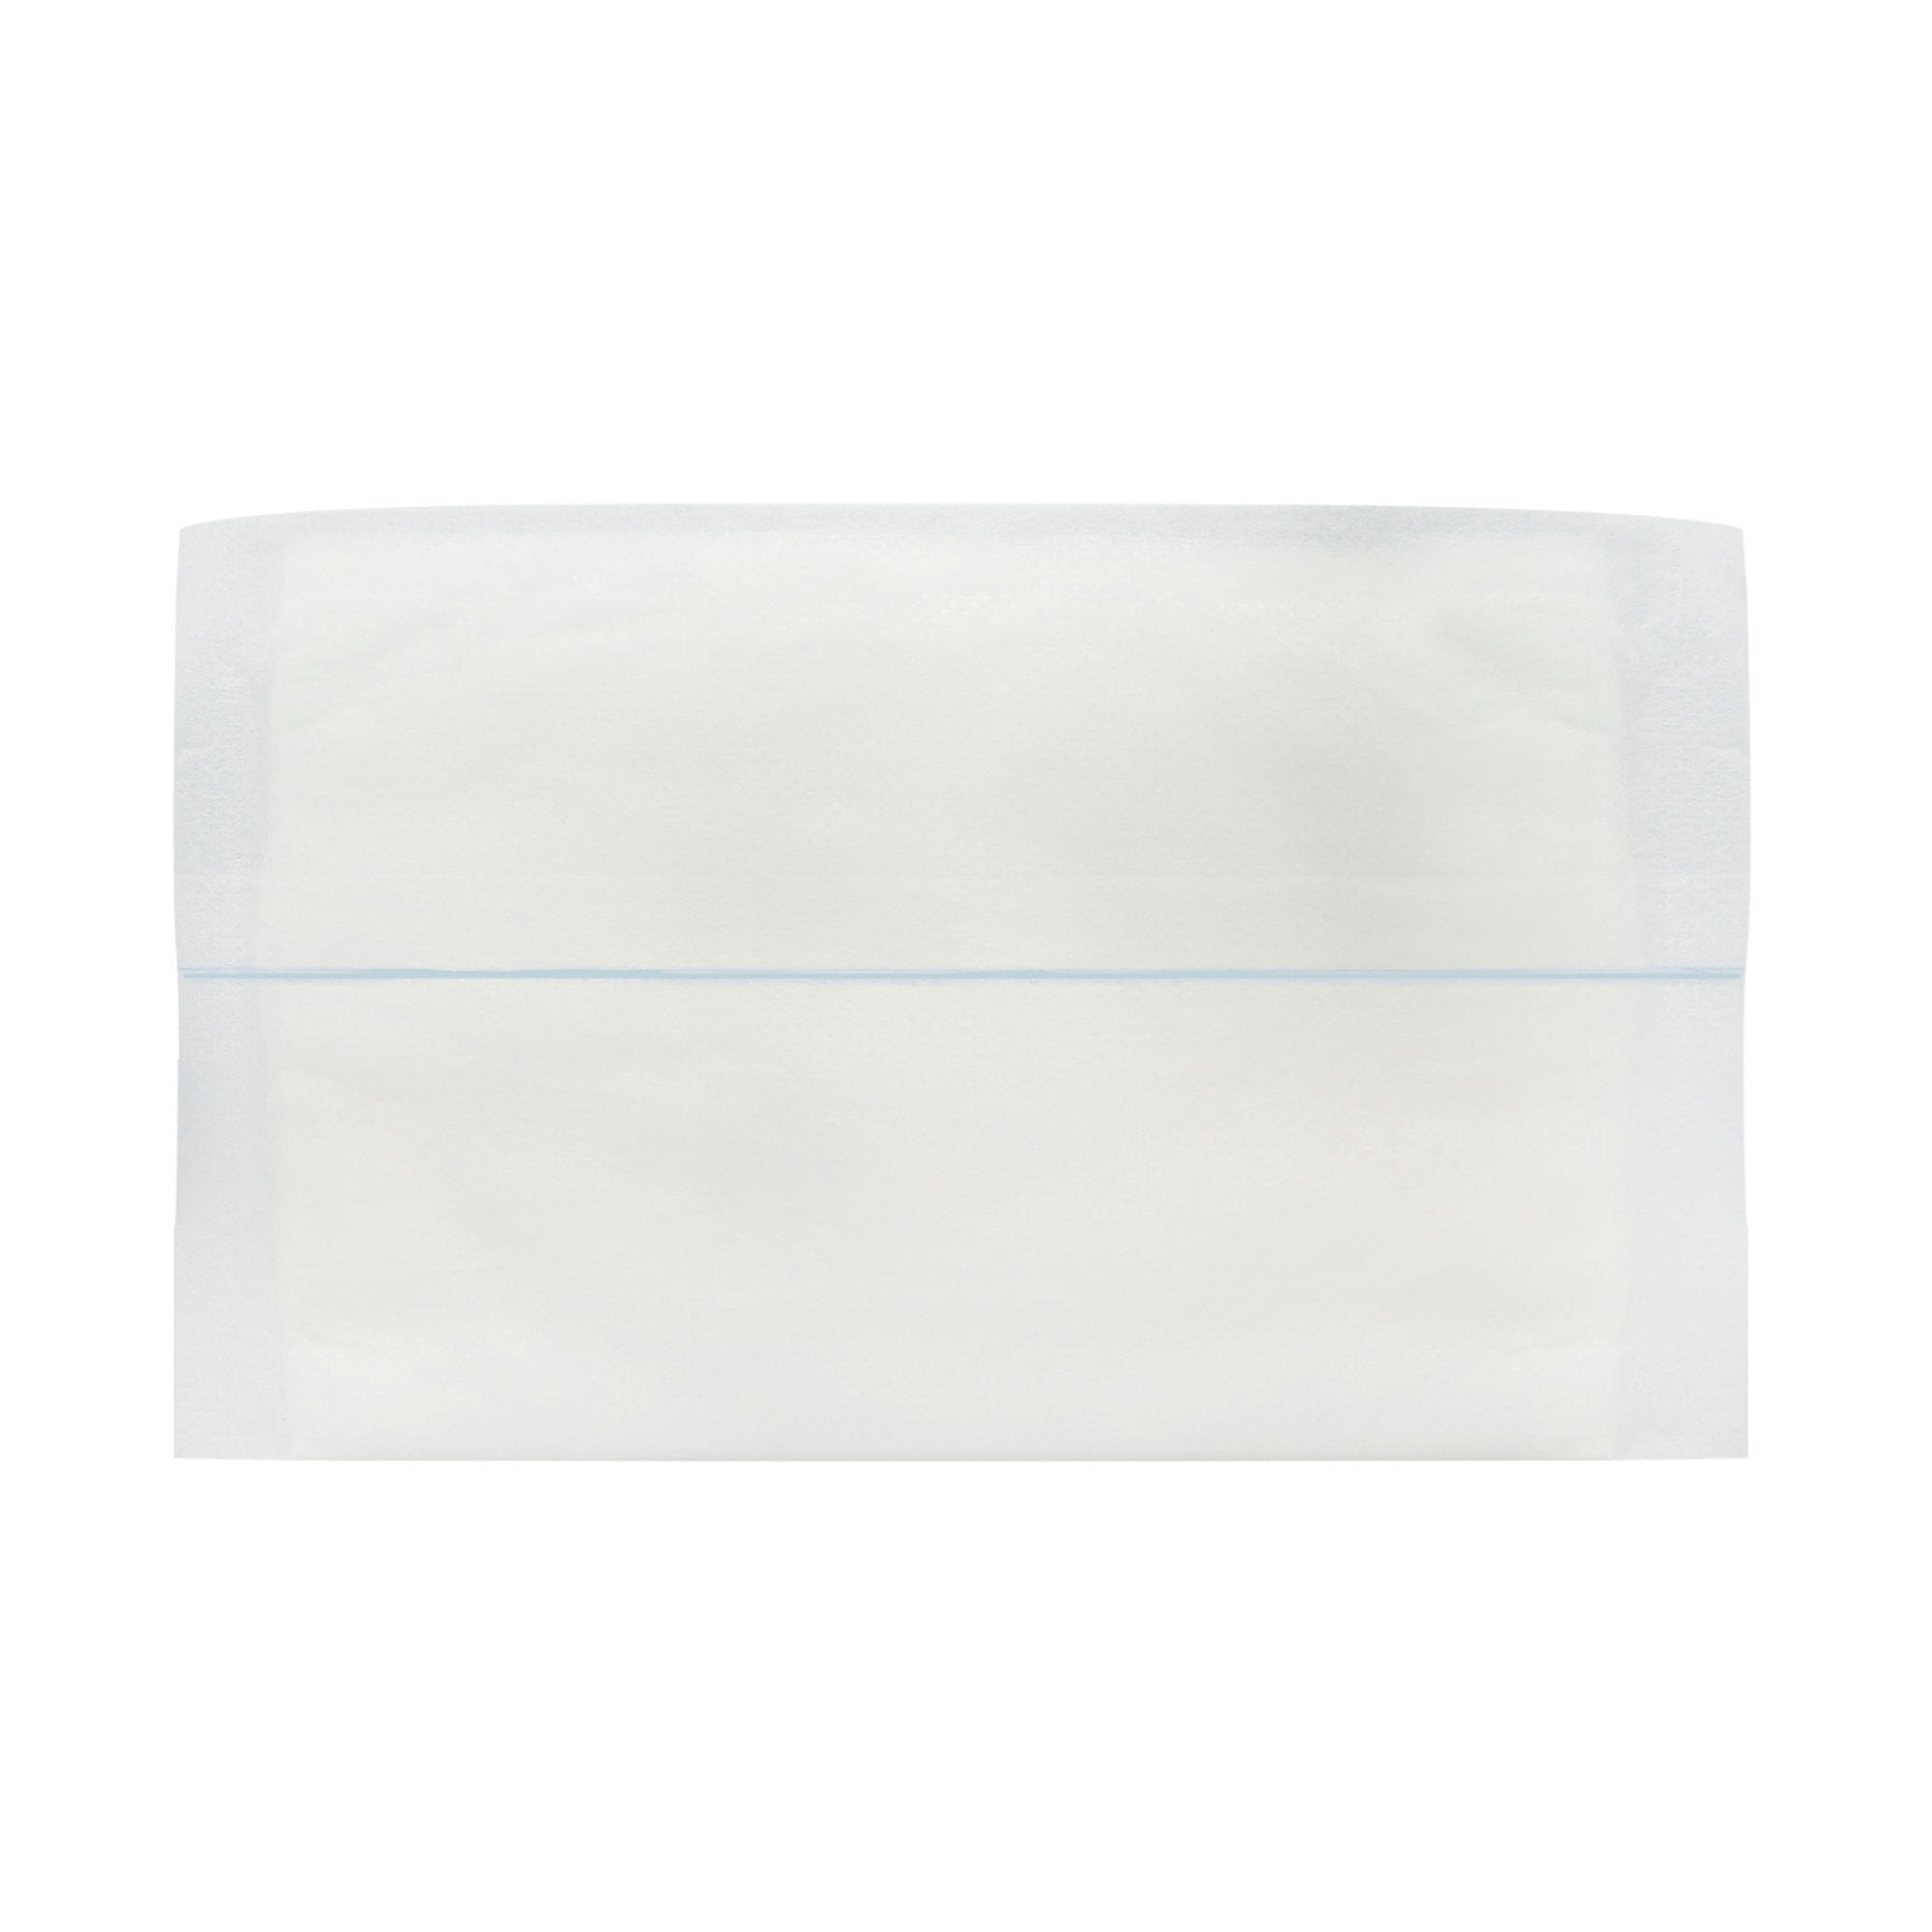 Abdominal Pad Dukal™ 5 X 9 Inch 25 per Pack NonSterile 1-Ply Rectangle